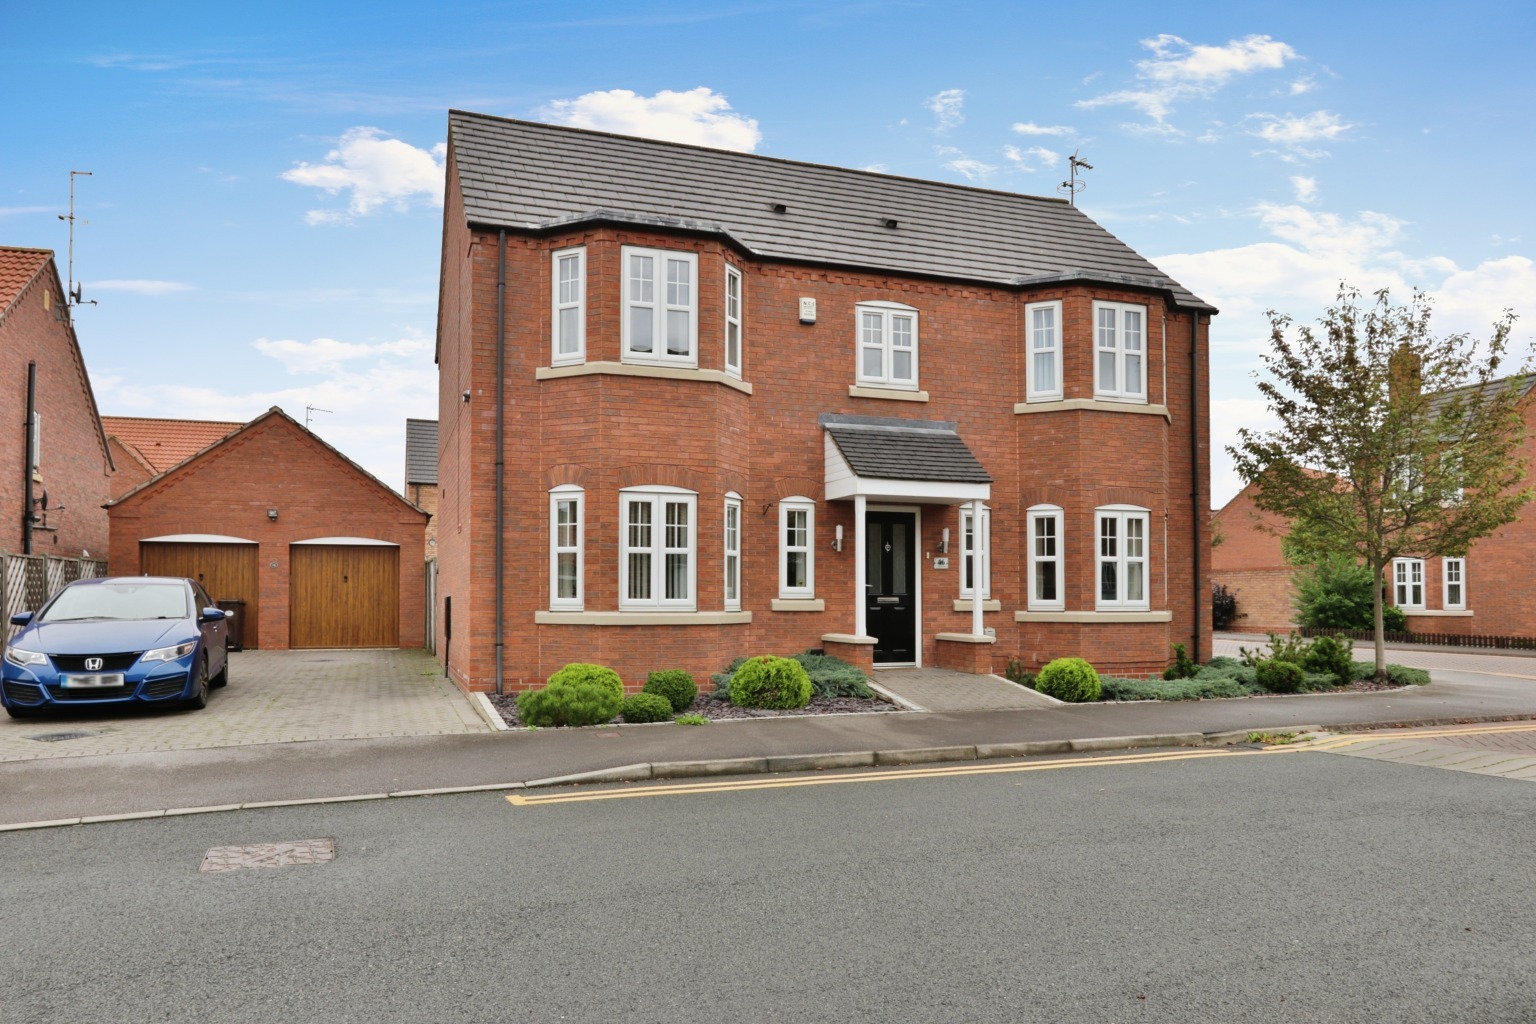 4 bed detached house for sale in Bowland Way, Hull - Property Image 1